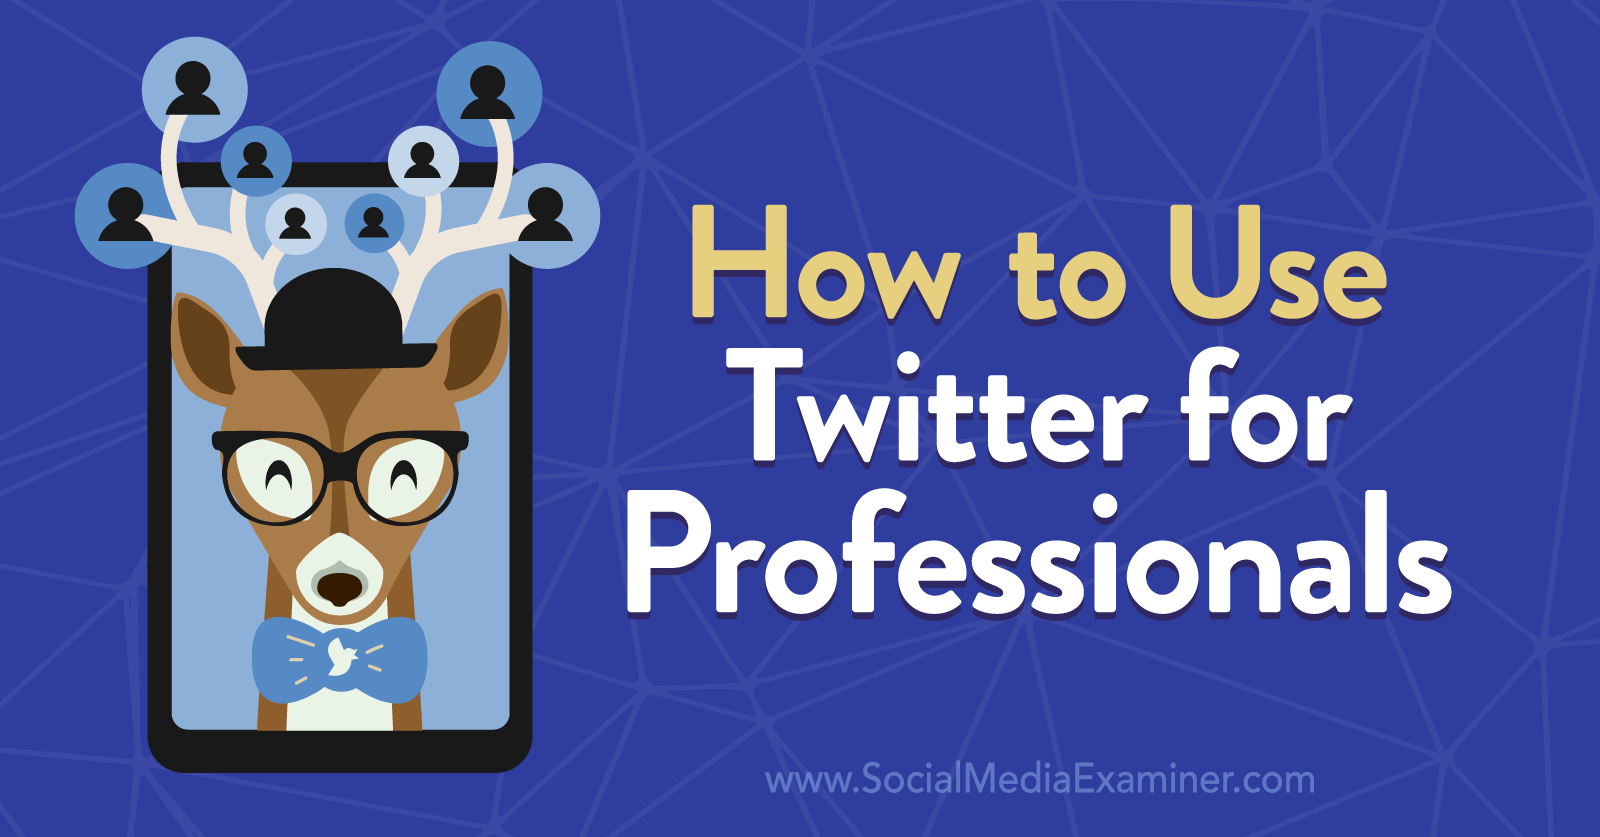 How to Use Twitter for Professionals by Anna Sonnenberg on Social Media Examiner.